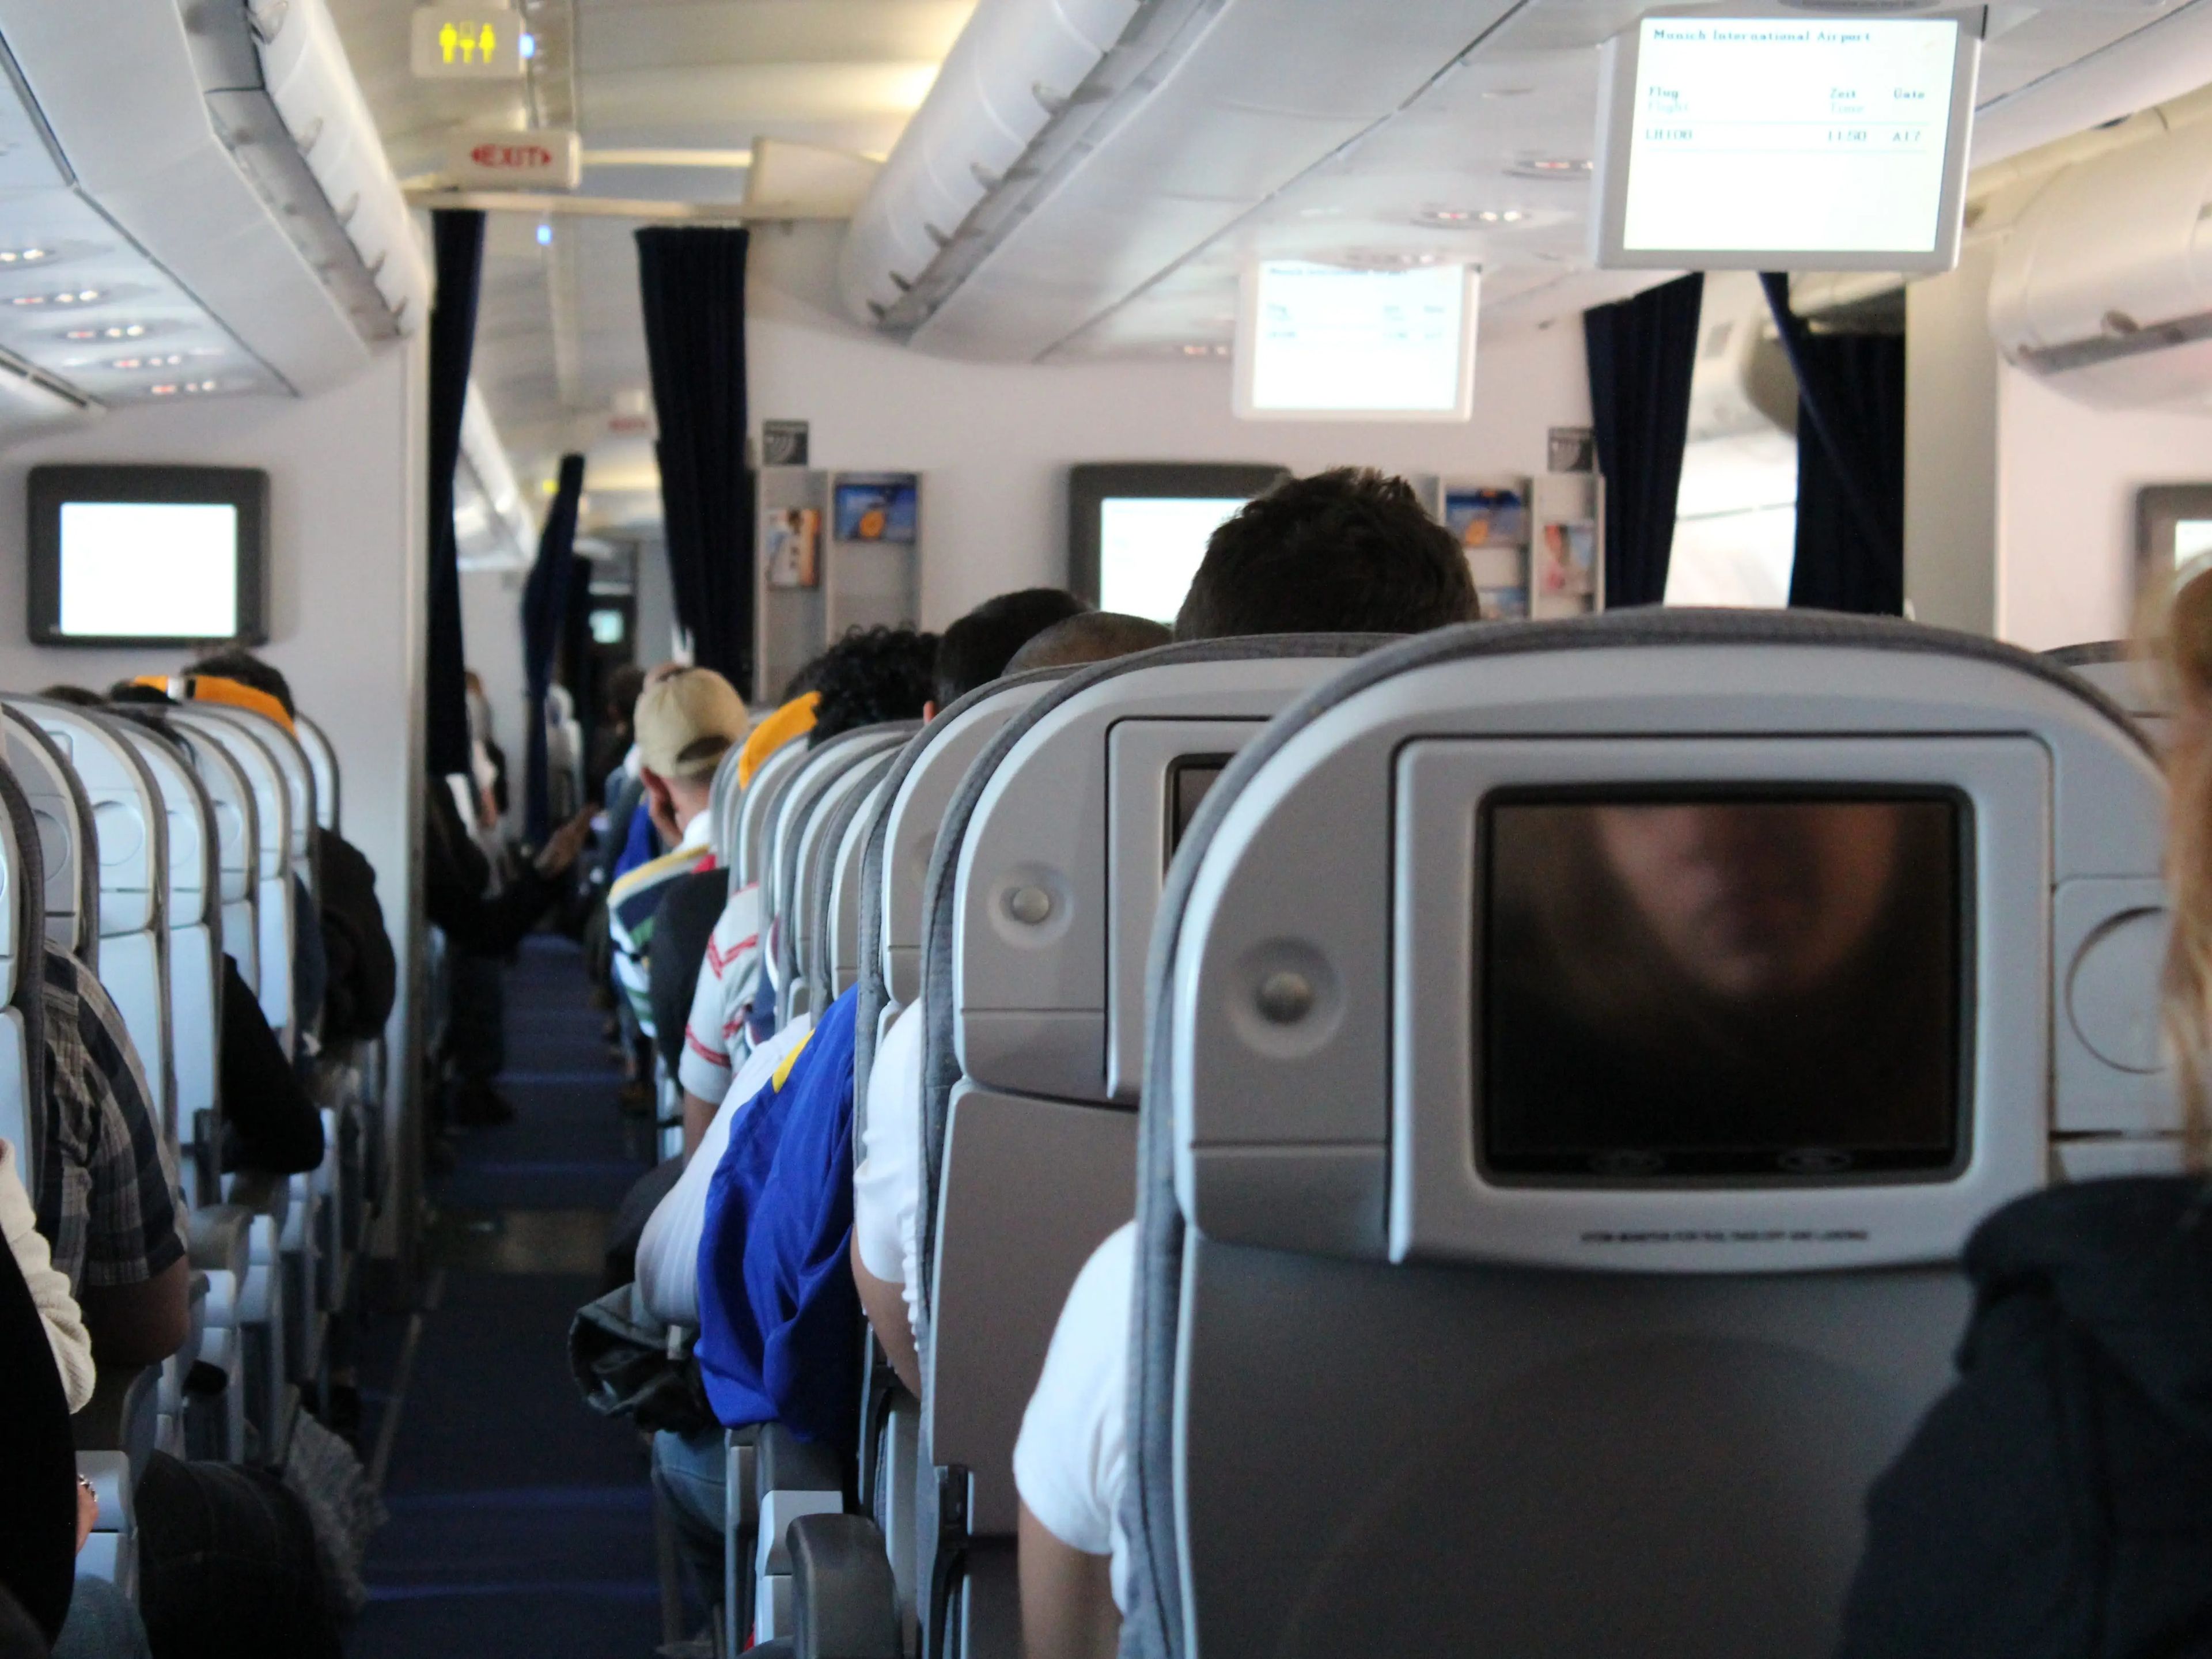 A stock image of people sitting in seats on a plane.